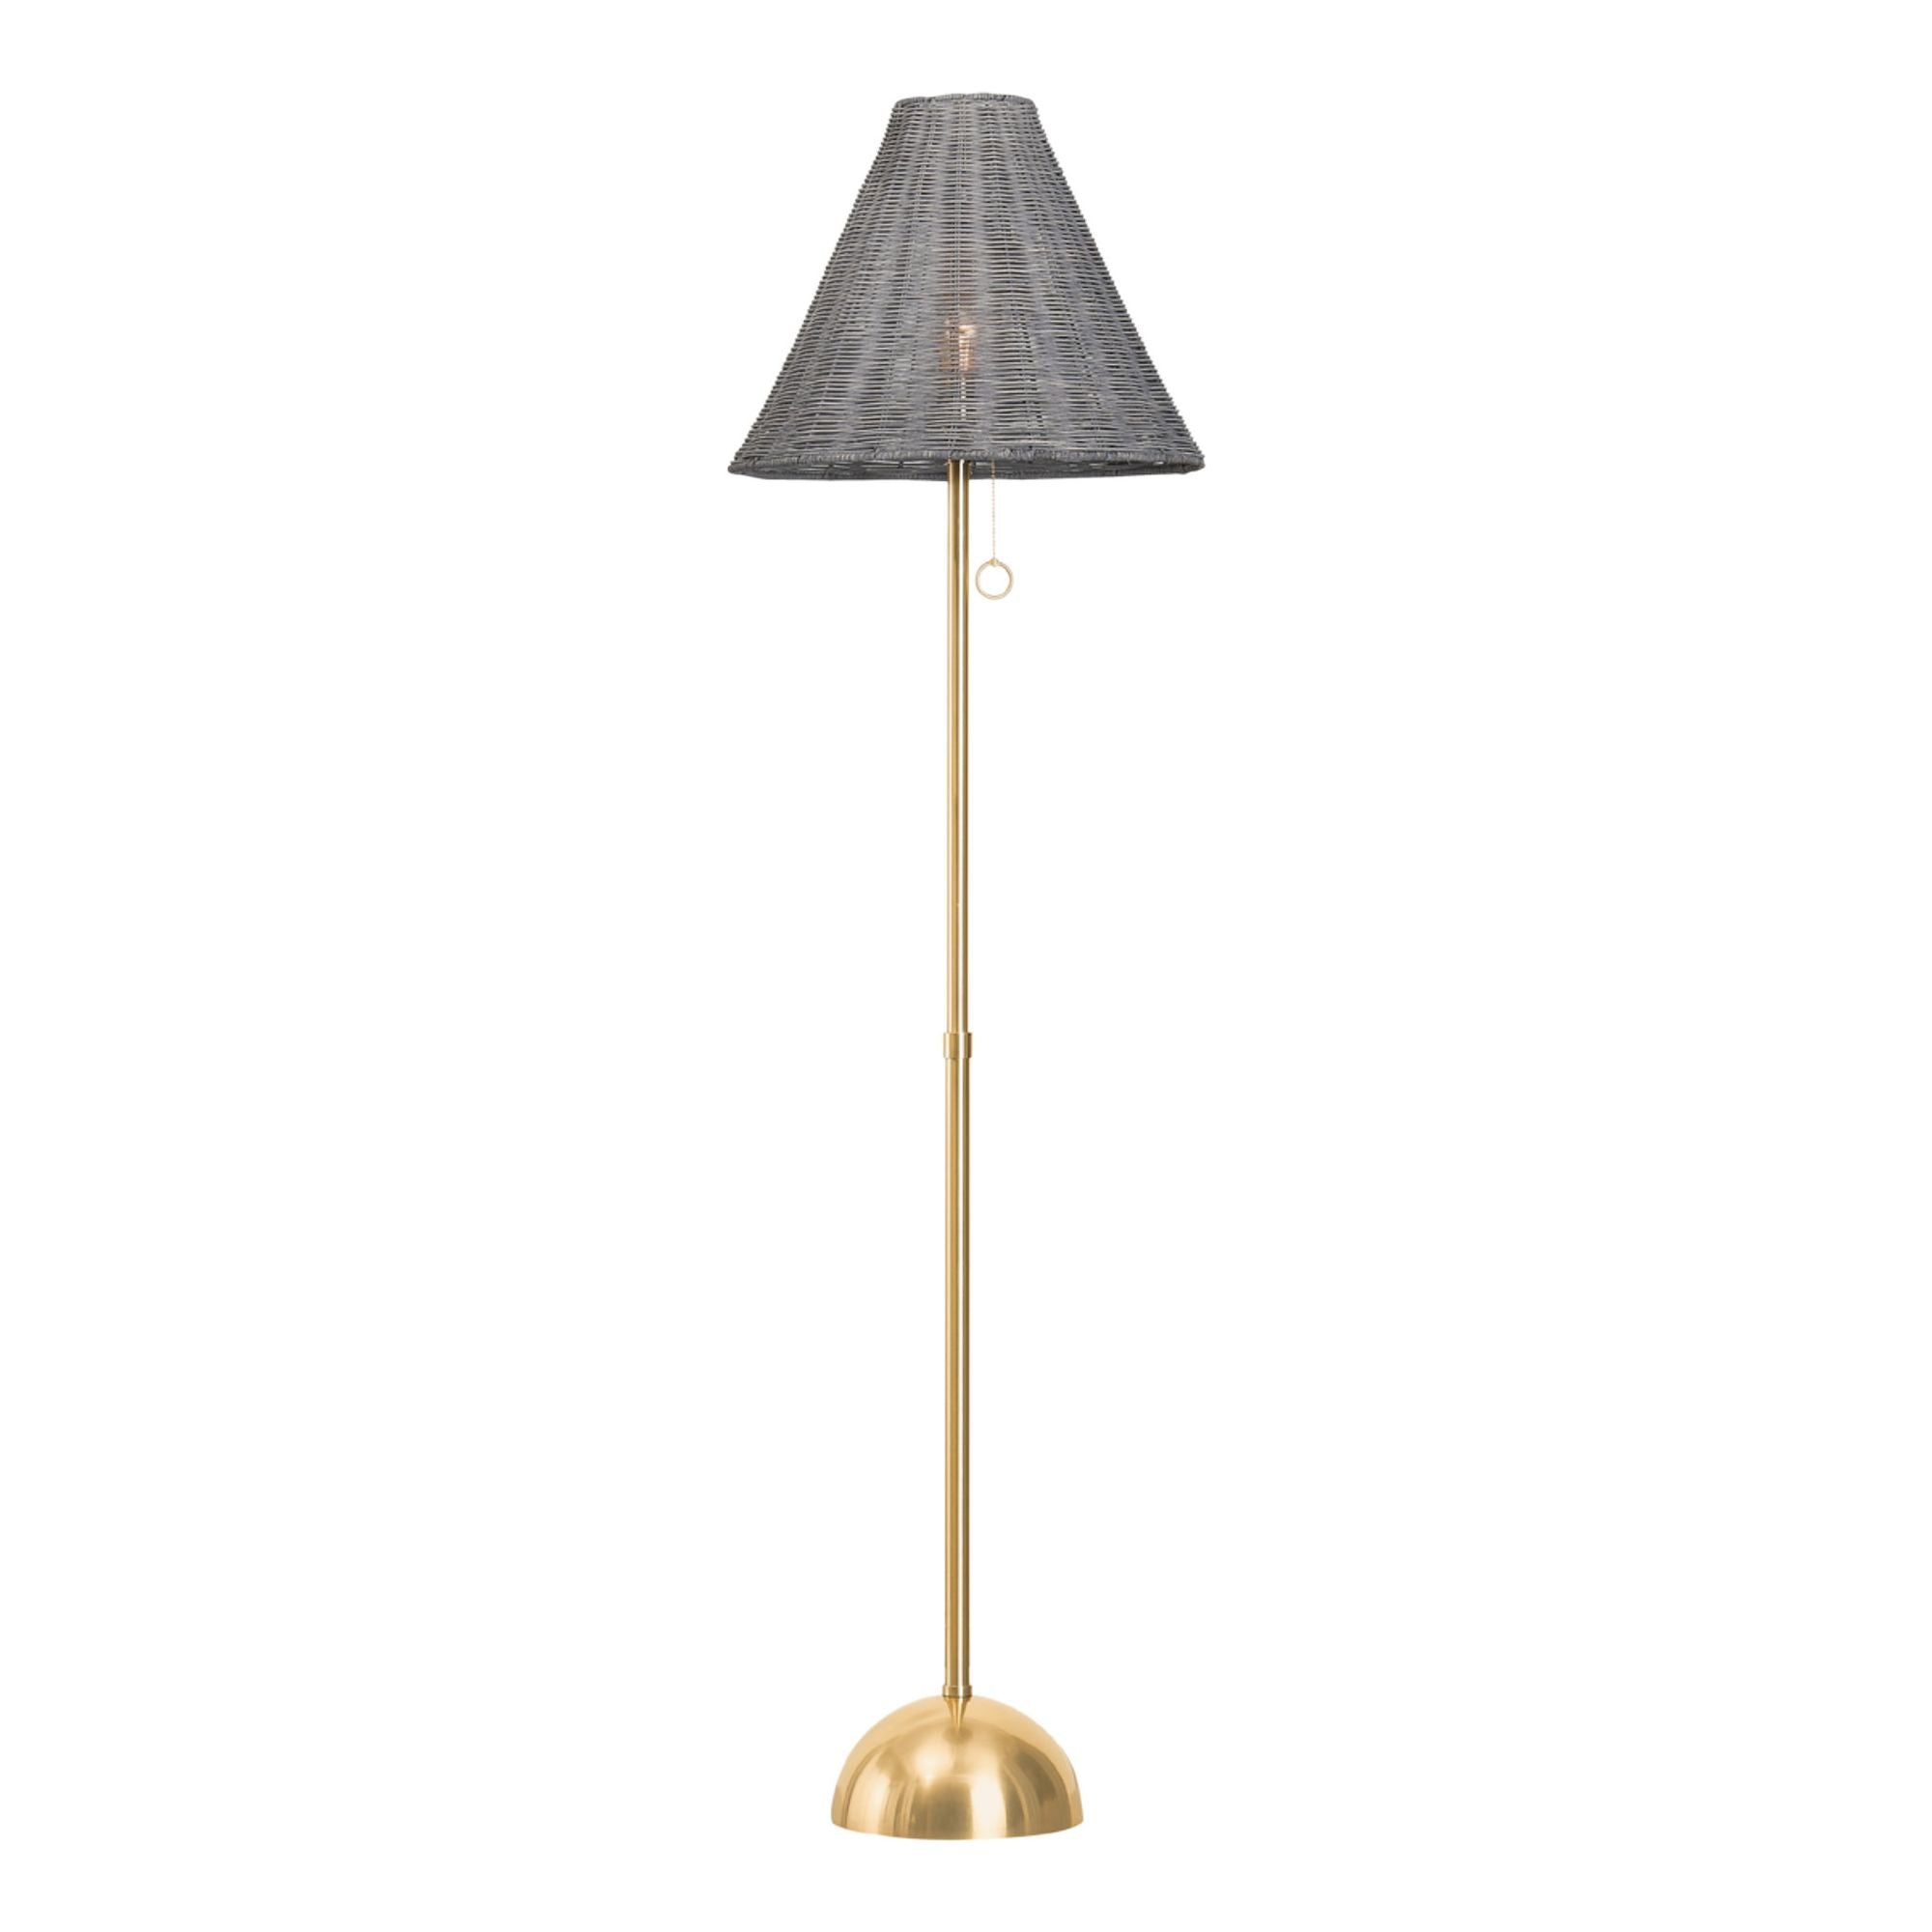 Destiny 1-Light Floor Lamp in Aged Brass by The Lifestyled Co